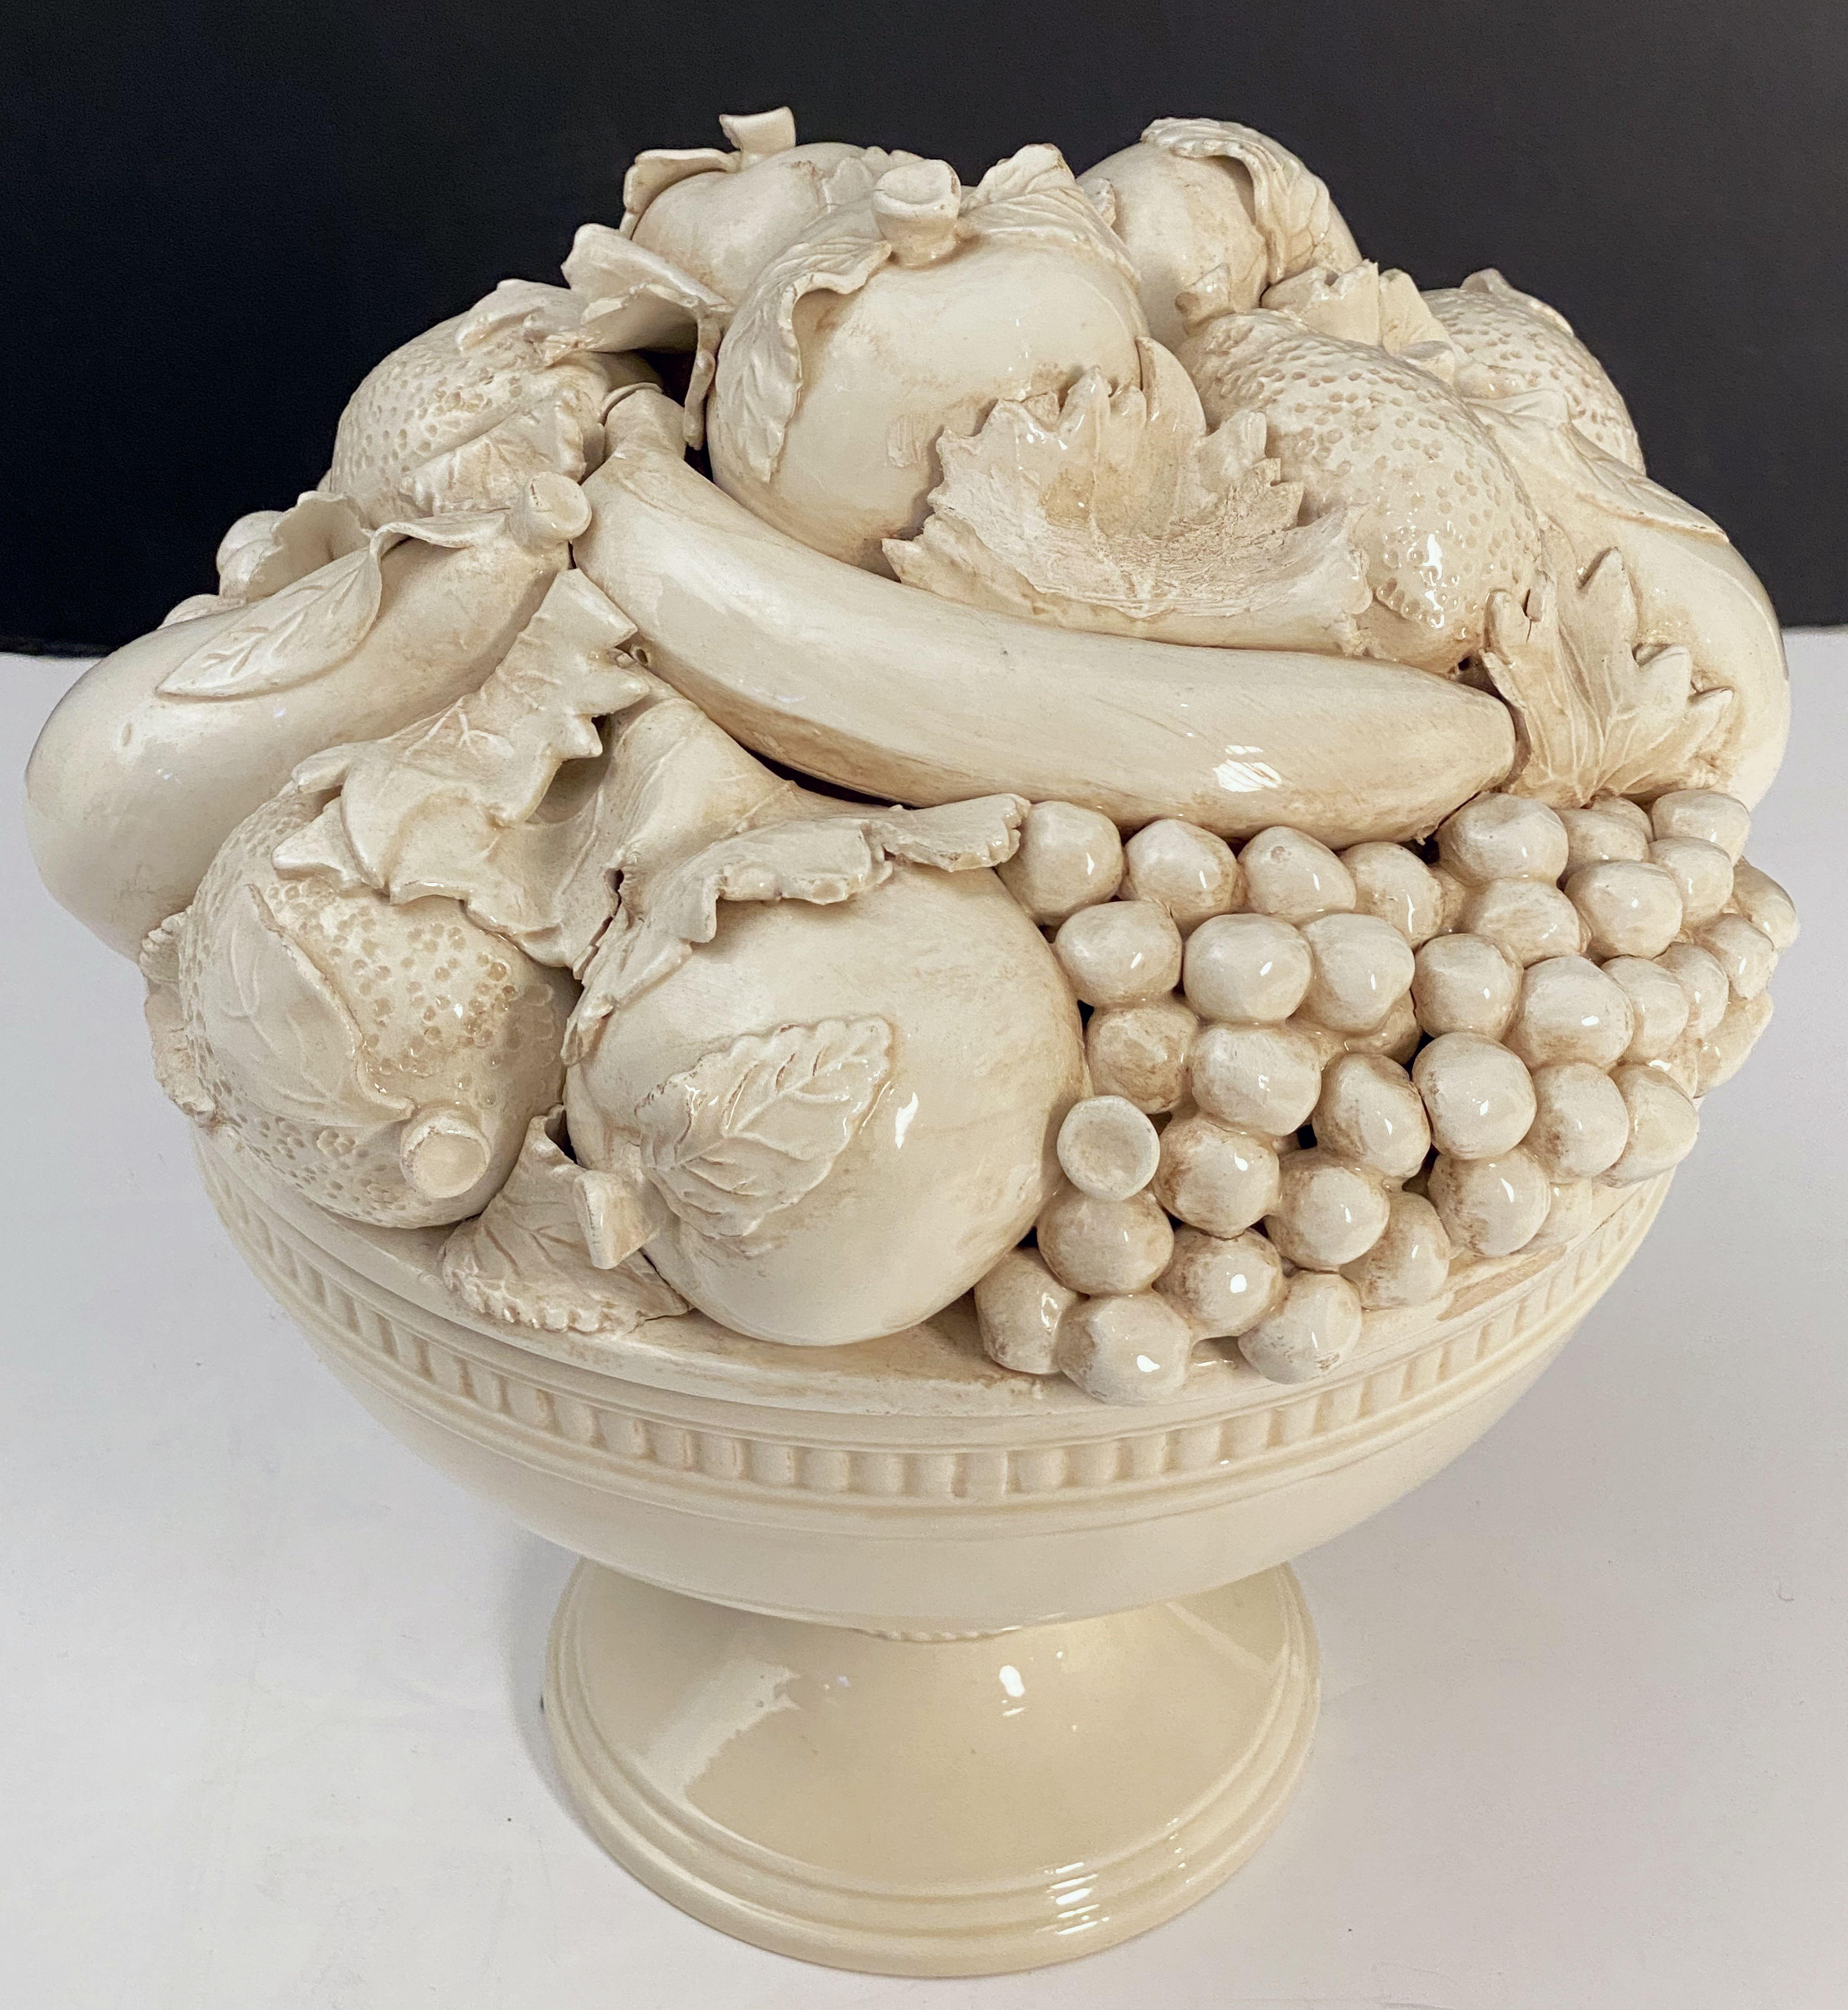 A fine large Italian cream-ware or white glazed ceramic pedestal bowl with mixed fruit topiary top, featuring a fitted lid with a relief of mixed fruits around the circumference, over a lower body with bowl and pedestal support on a round plinth